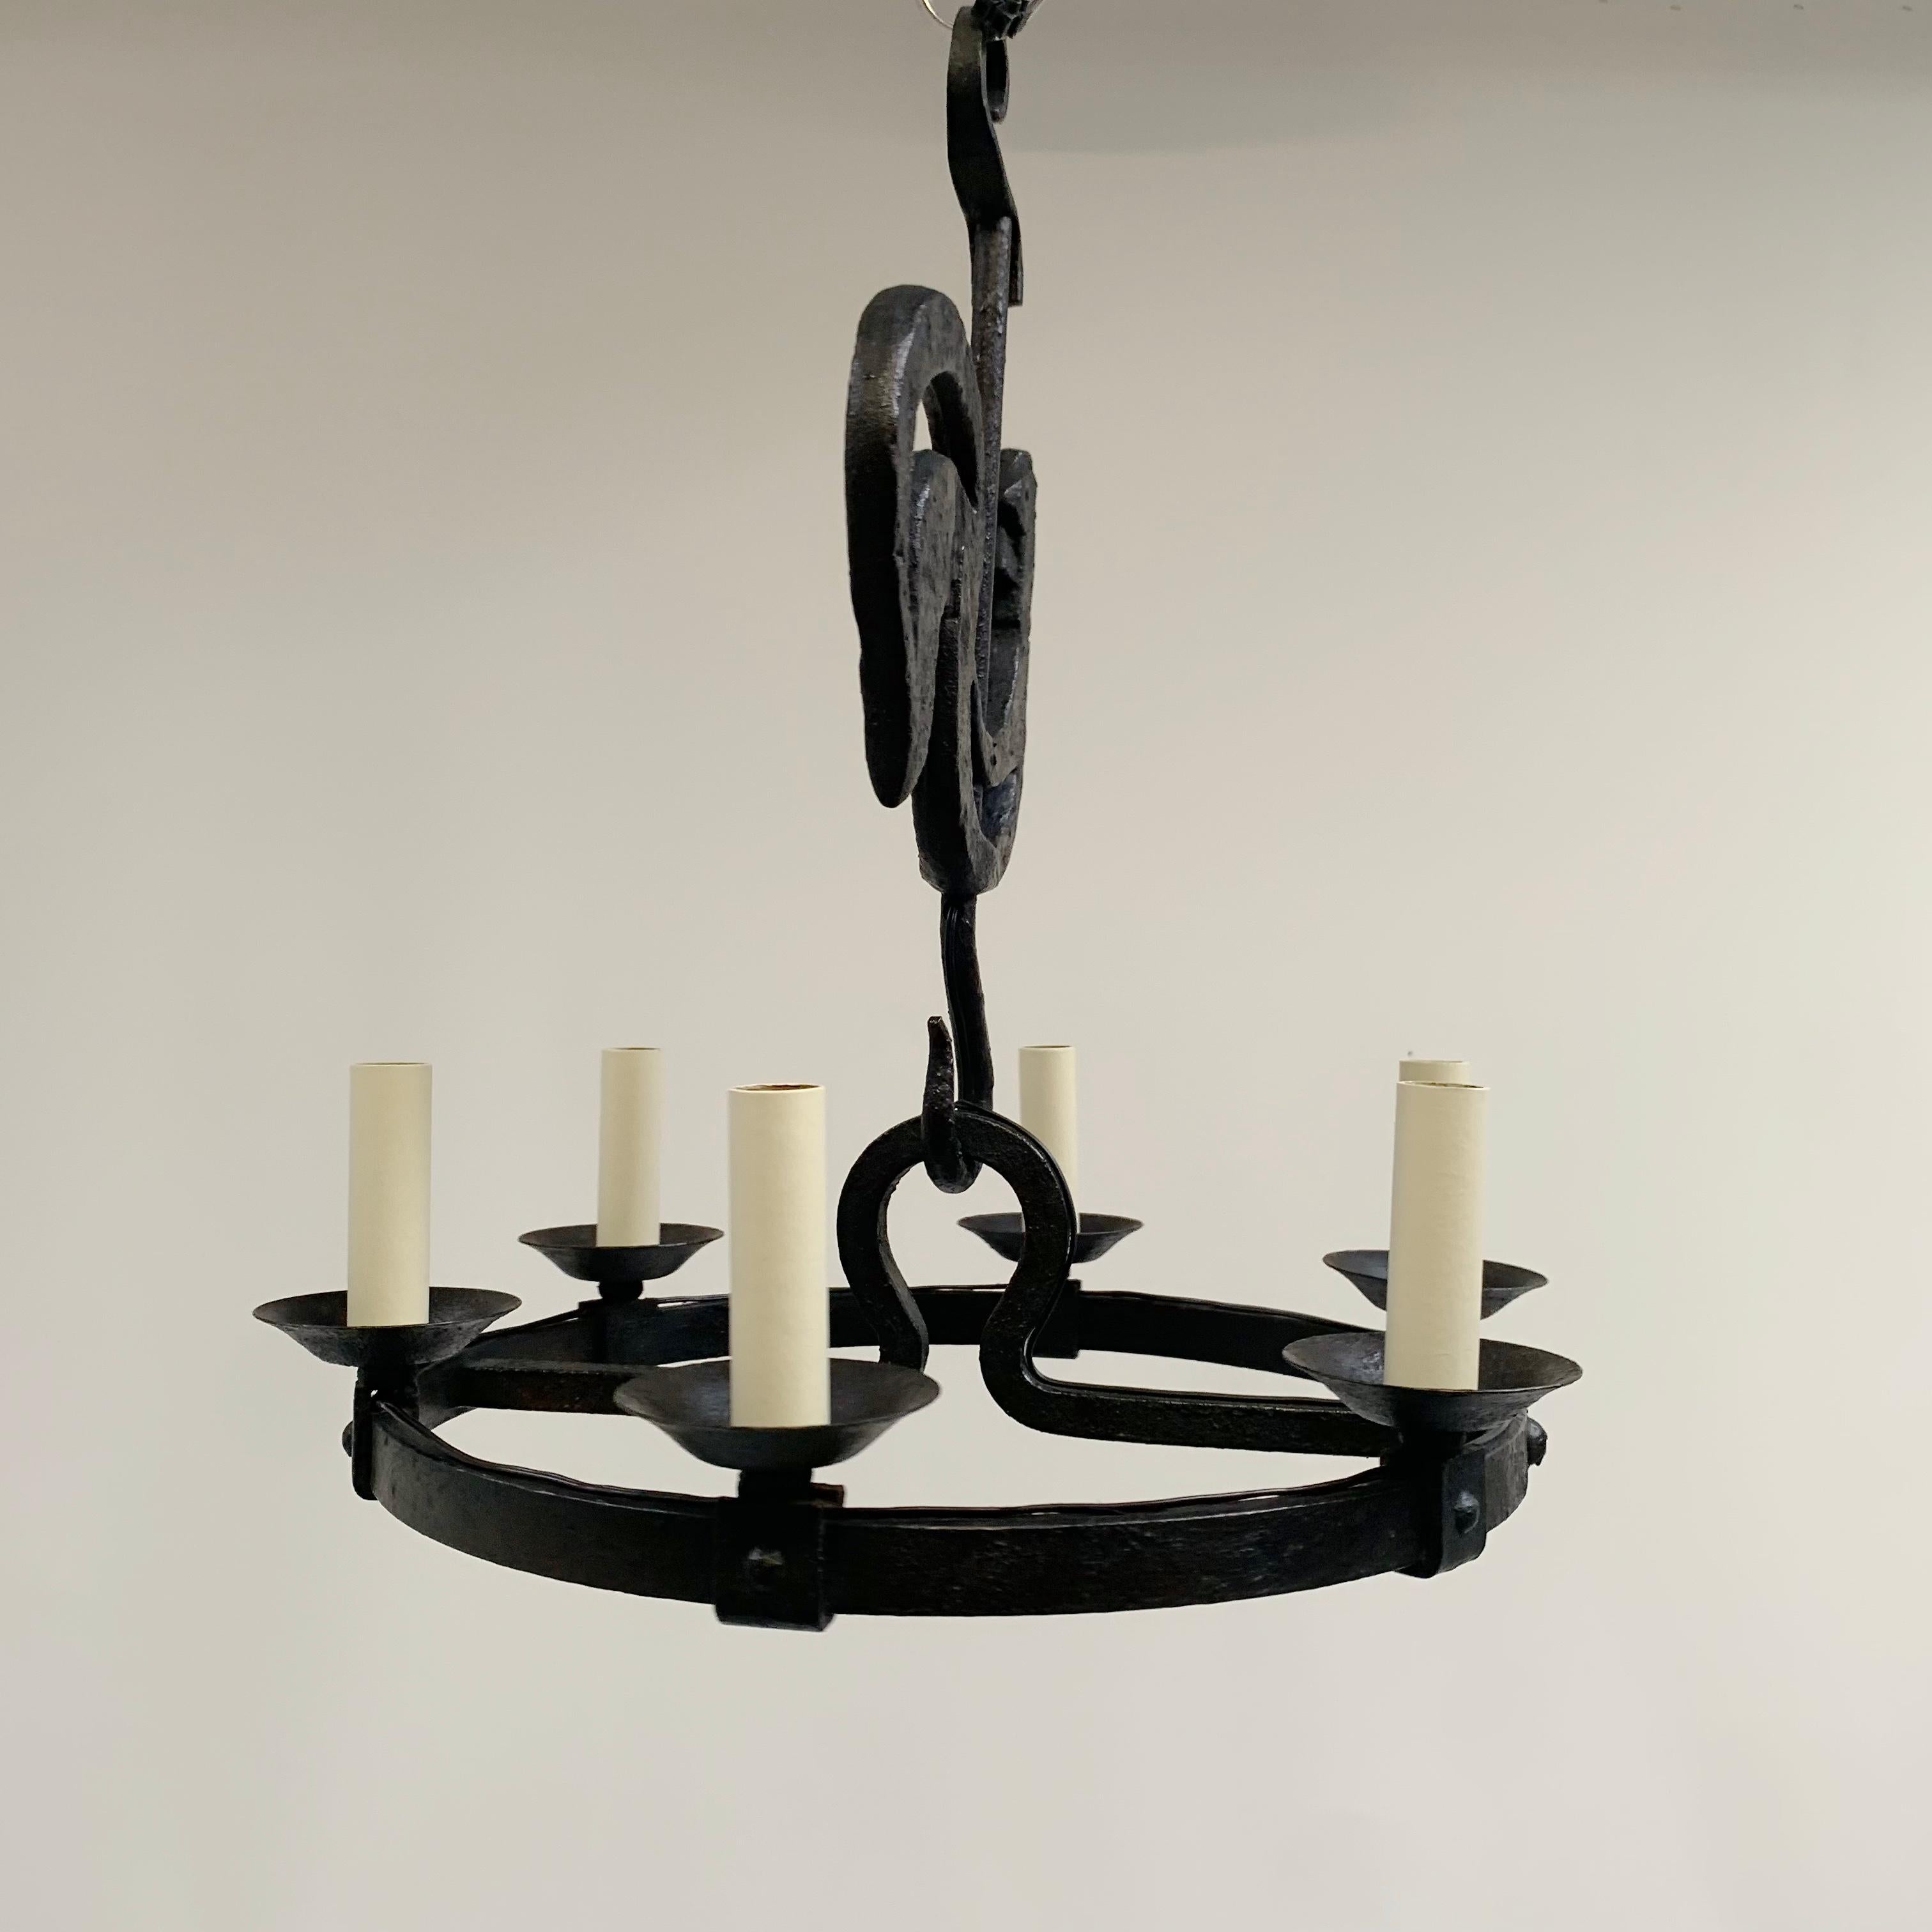 French Mid-Century Black Wrought Iron Girouette Chandelier, France circa 1950. For Sale